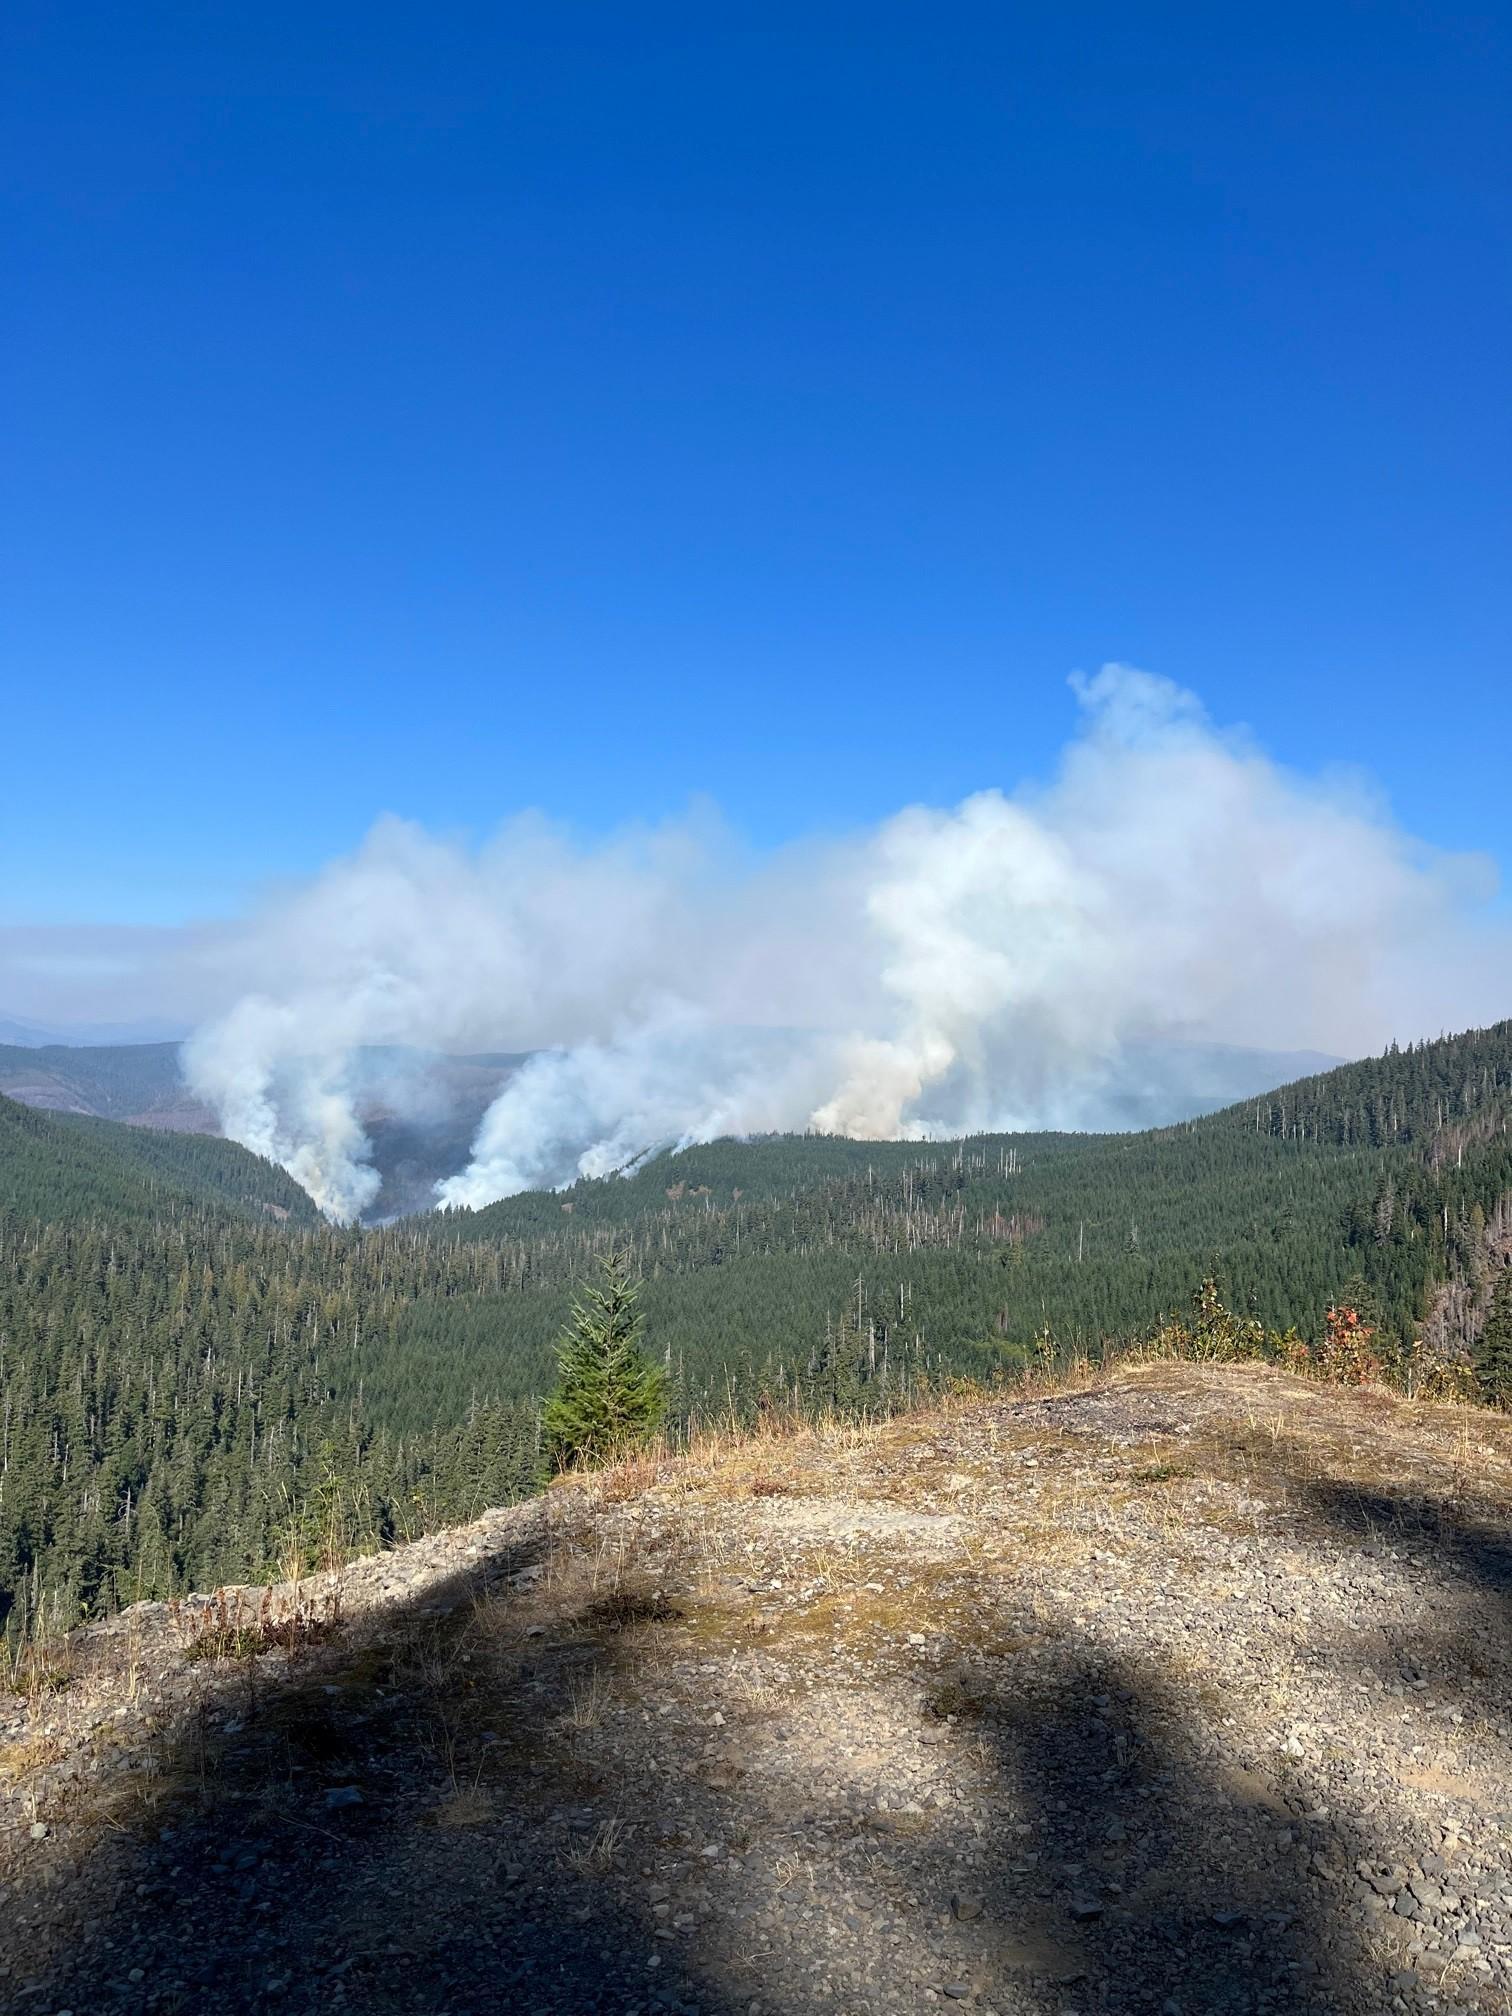 Smoke rising from a forested area